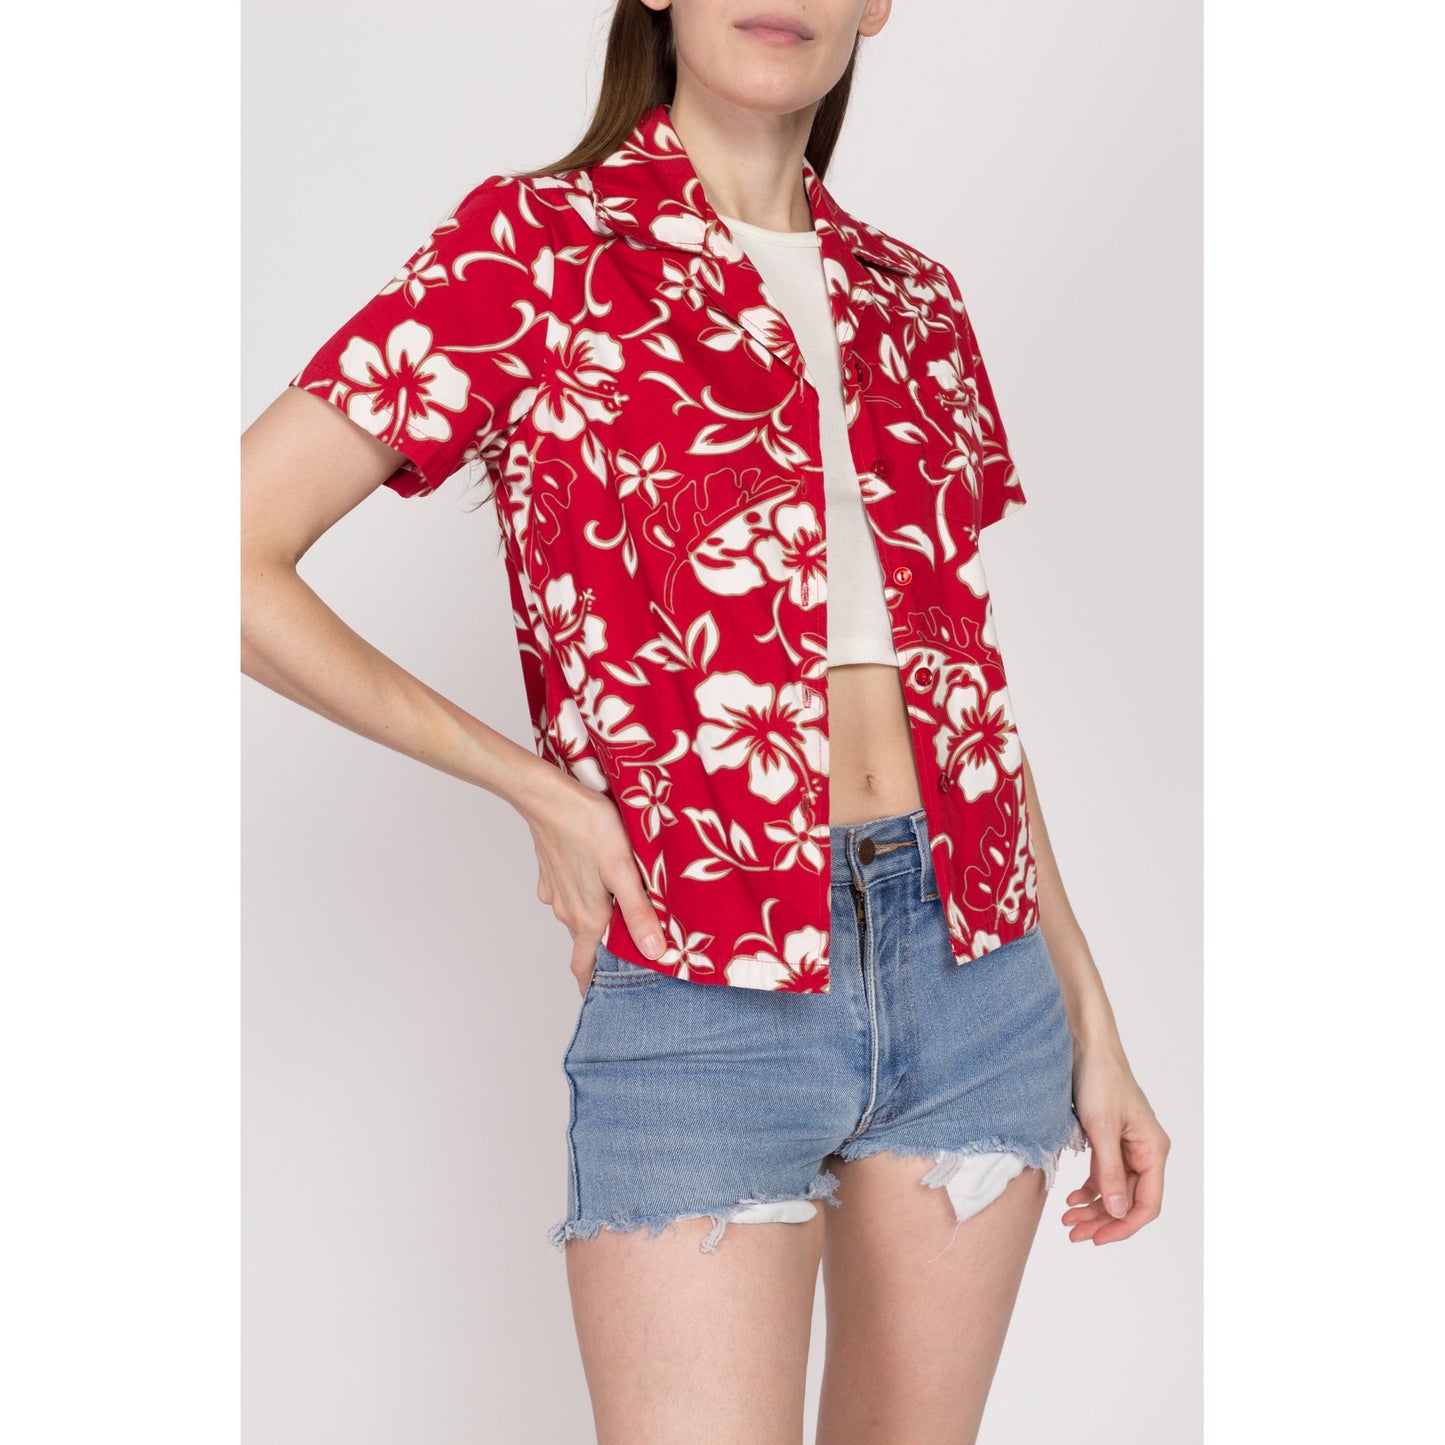 XS 90s Red Floral Hawaiian Aloha Shirt | Vintage Tropical Print Cotton Short Sleeve Button Up Collared Top